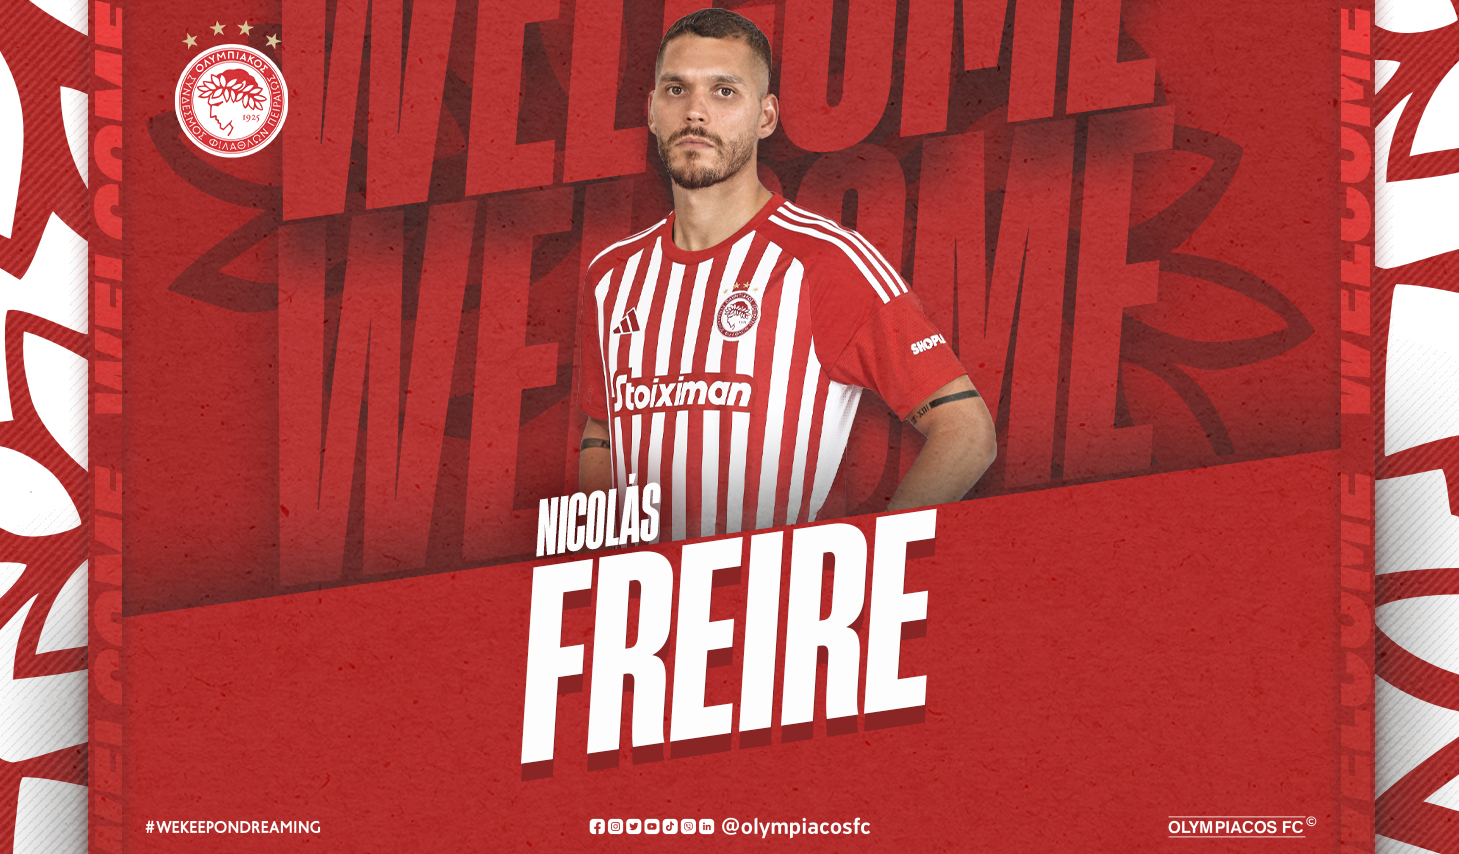 Freire joins Olympiacos